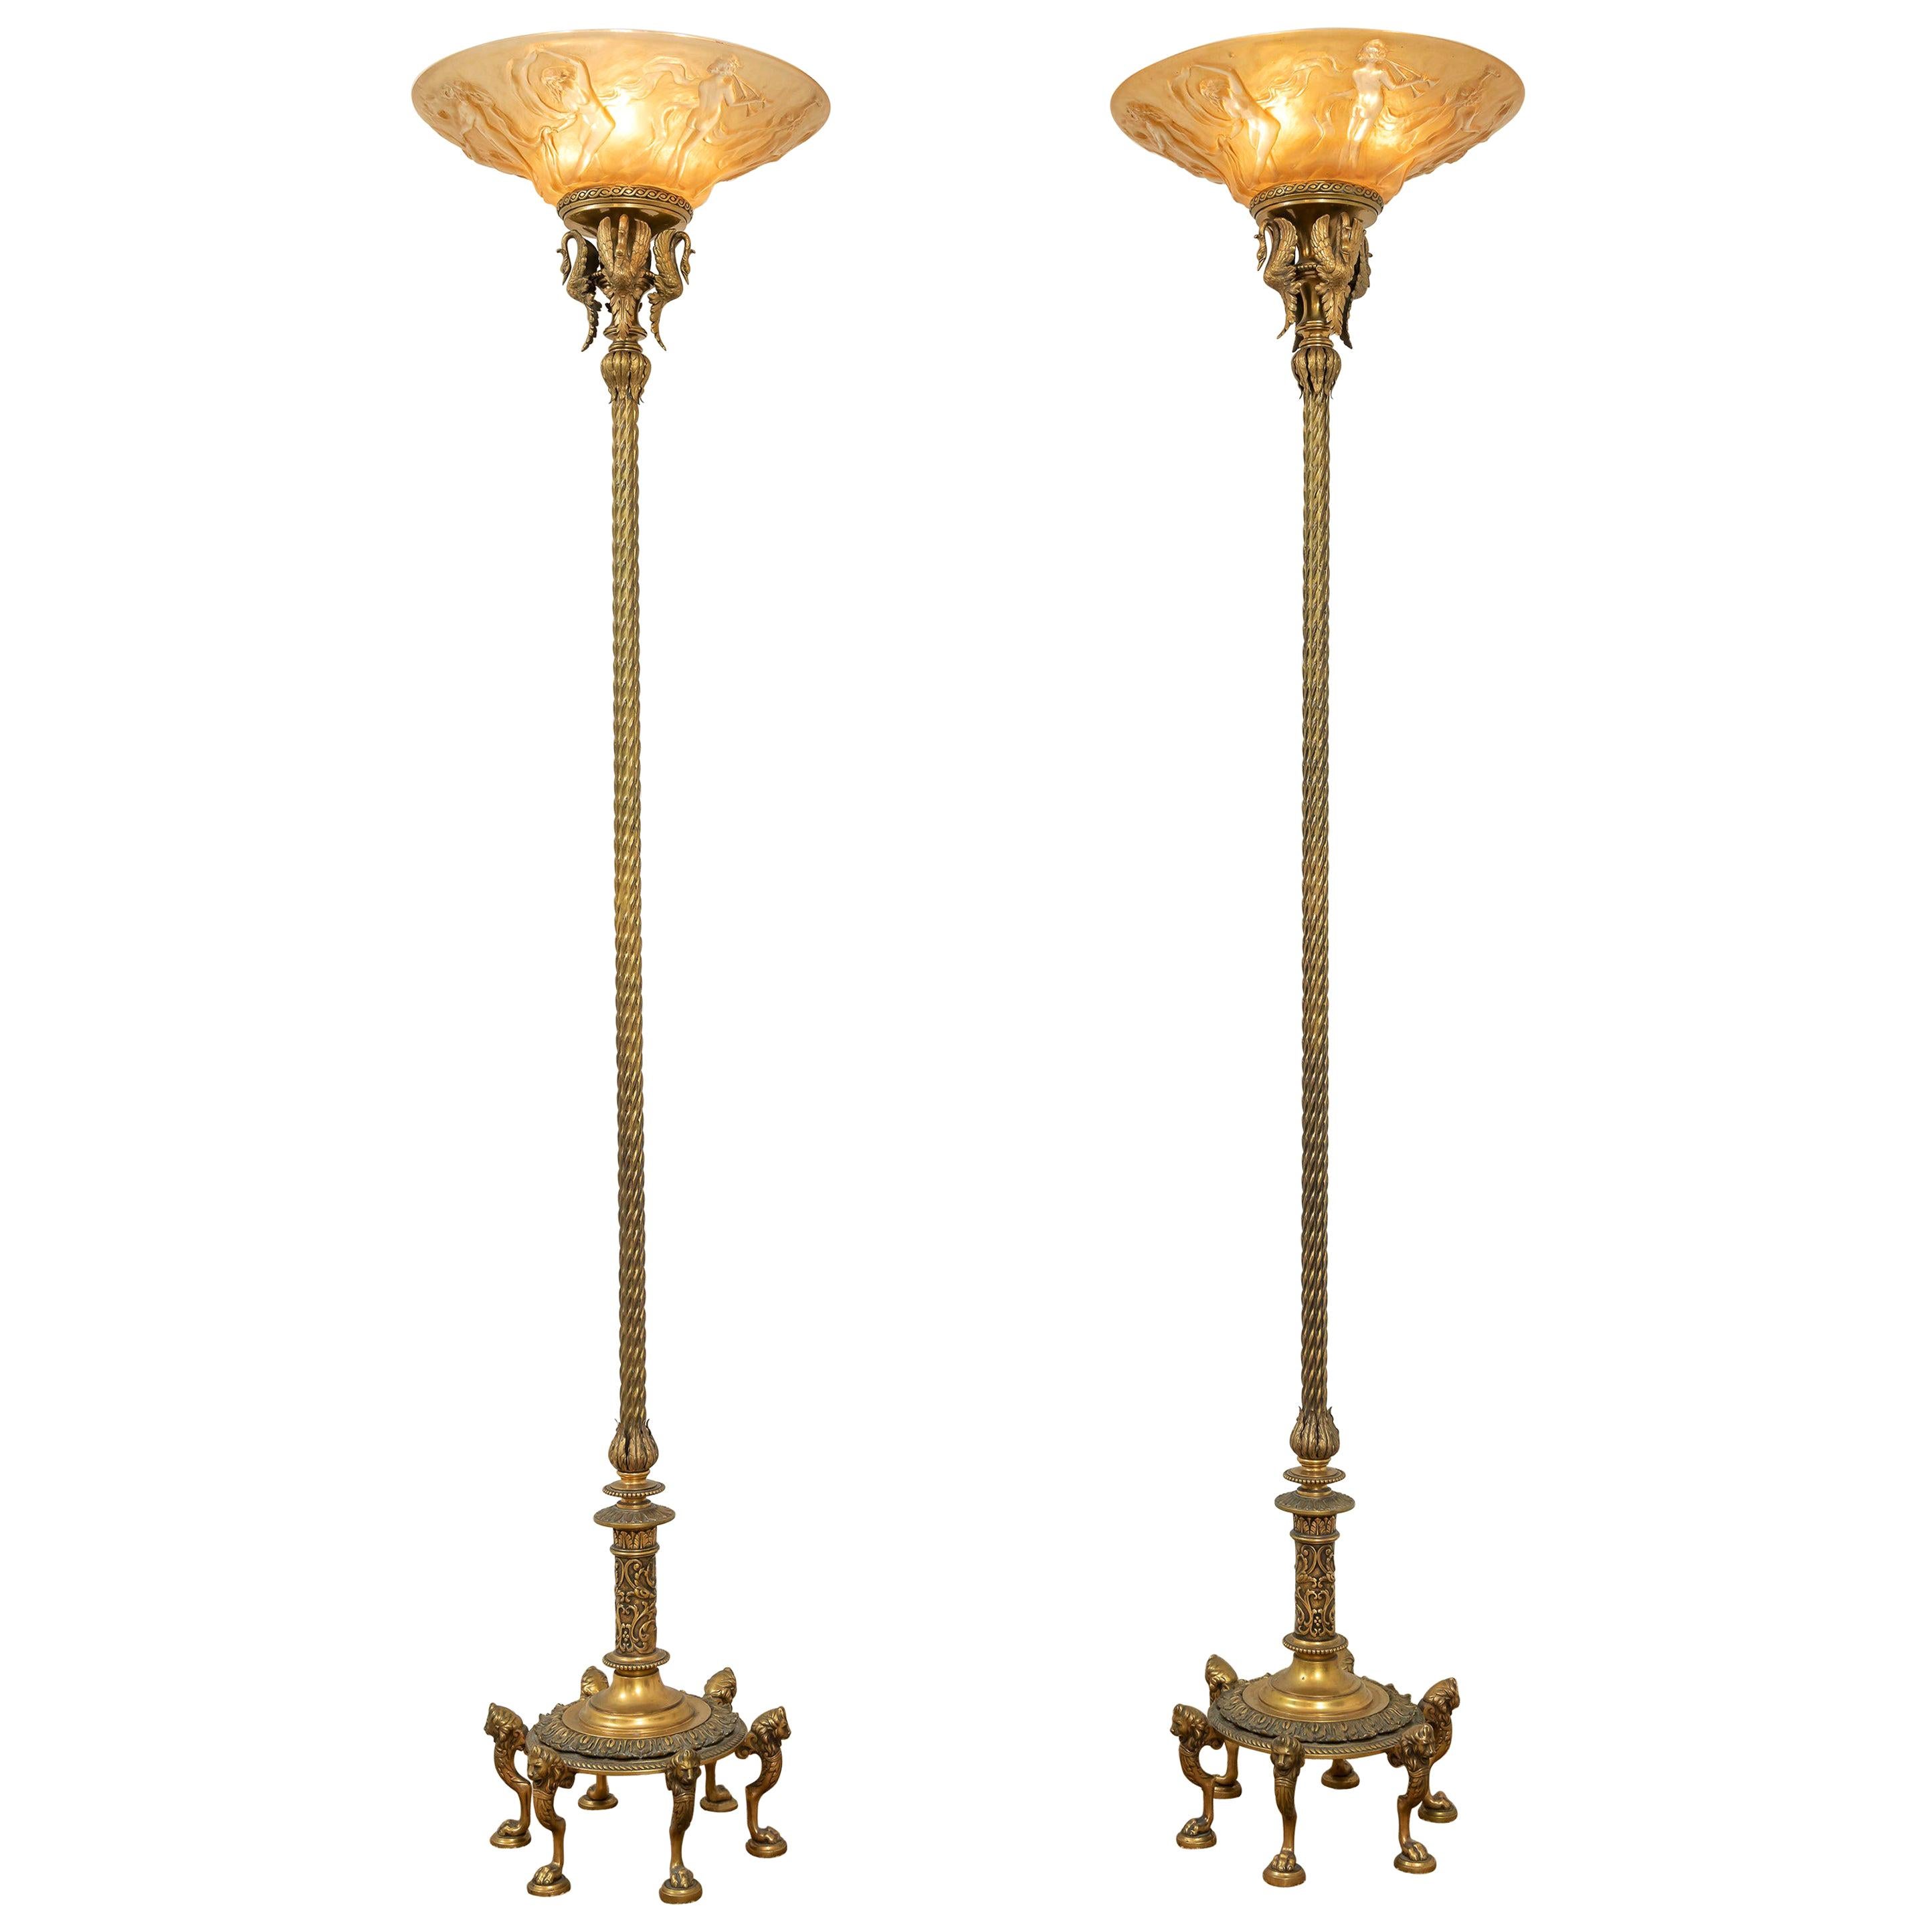 Pair of Bronze & Glass Torchiere Floor Lamps with Nudes on the Glass, circa 1915